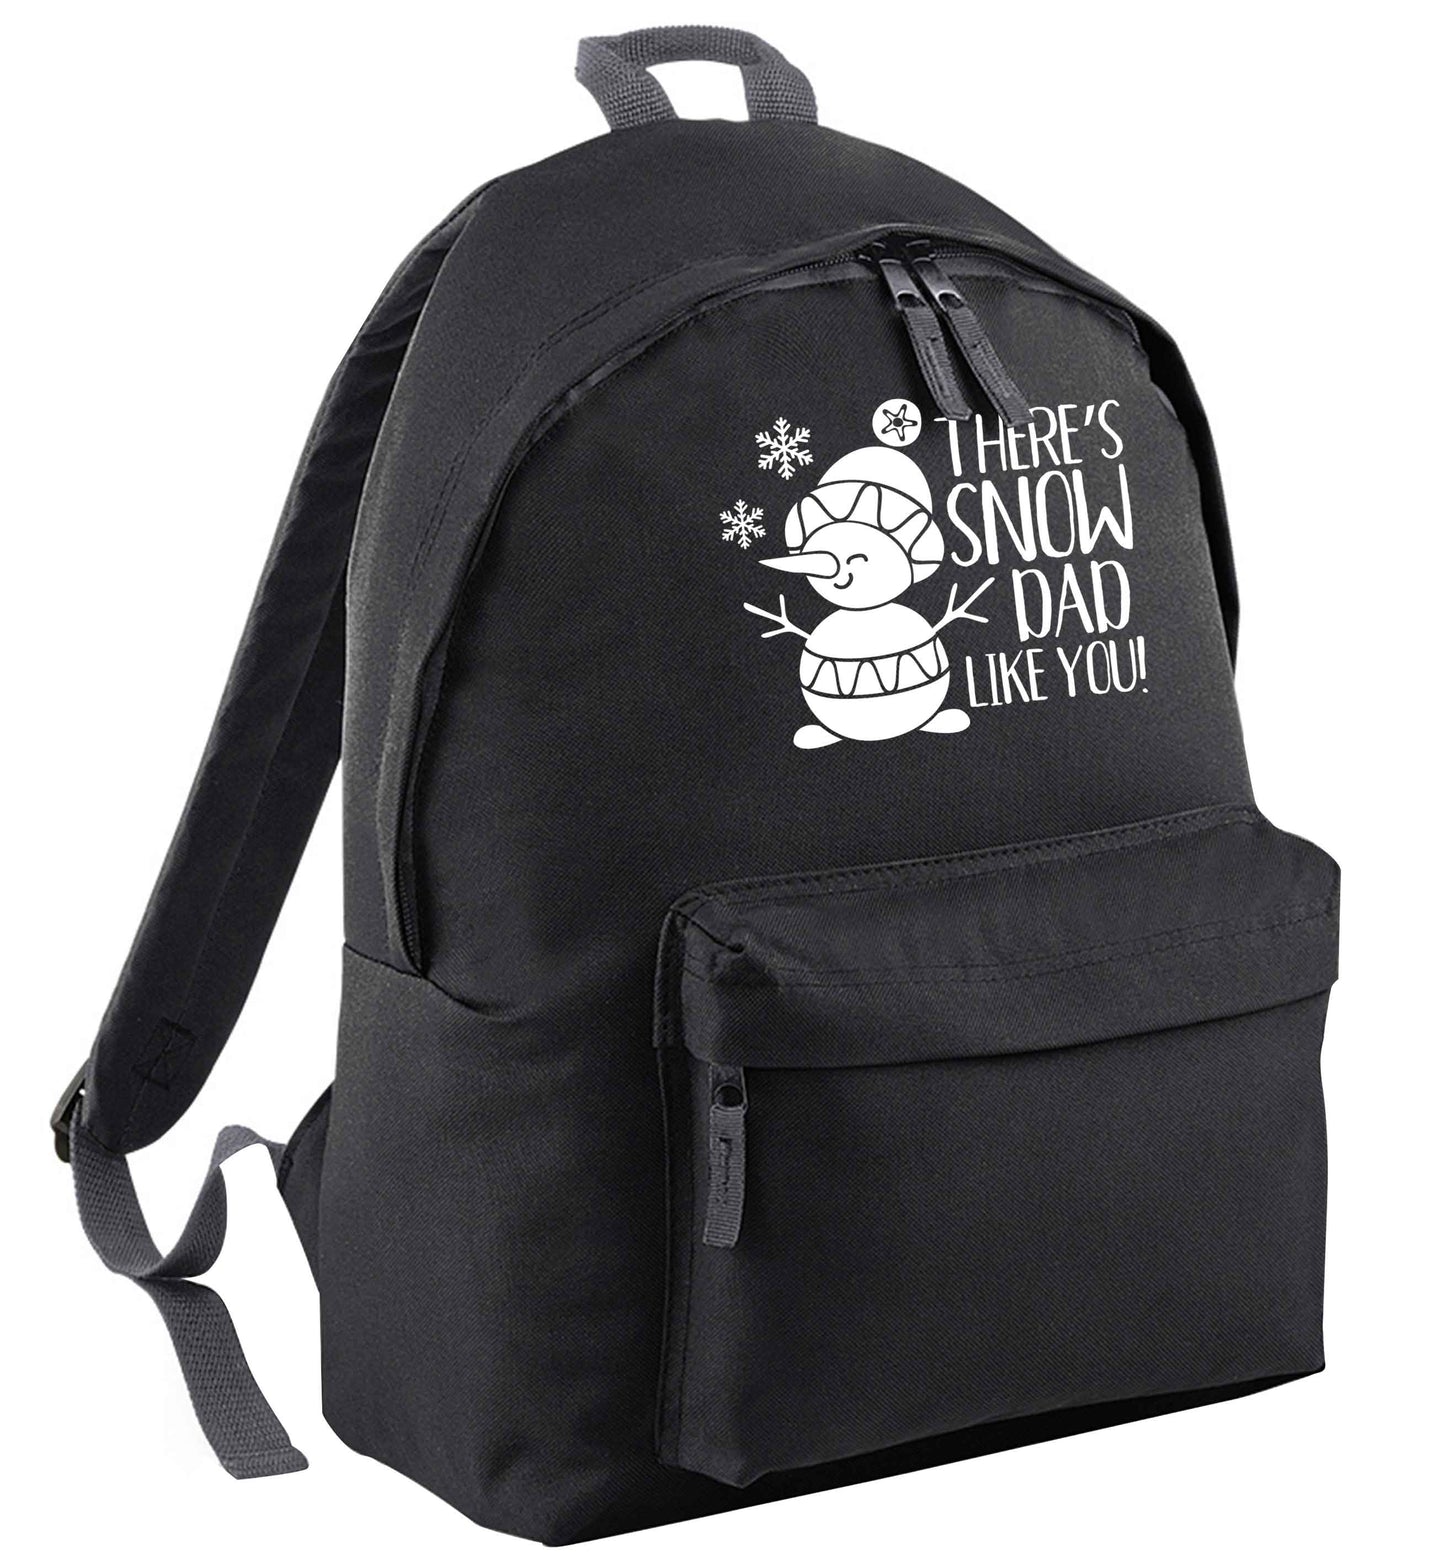 There's snow dad like you | Children's backpack